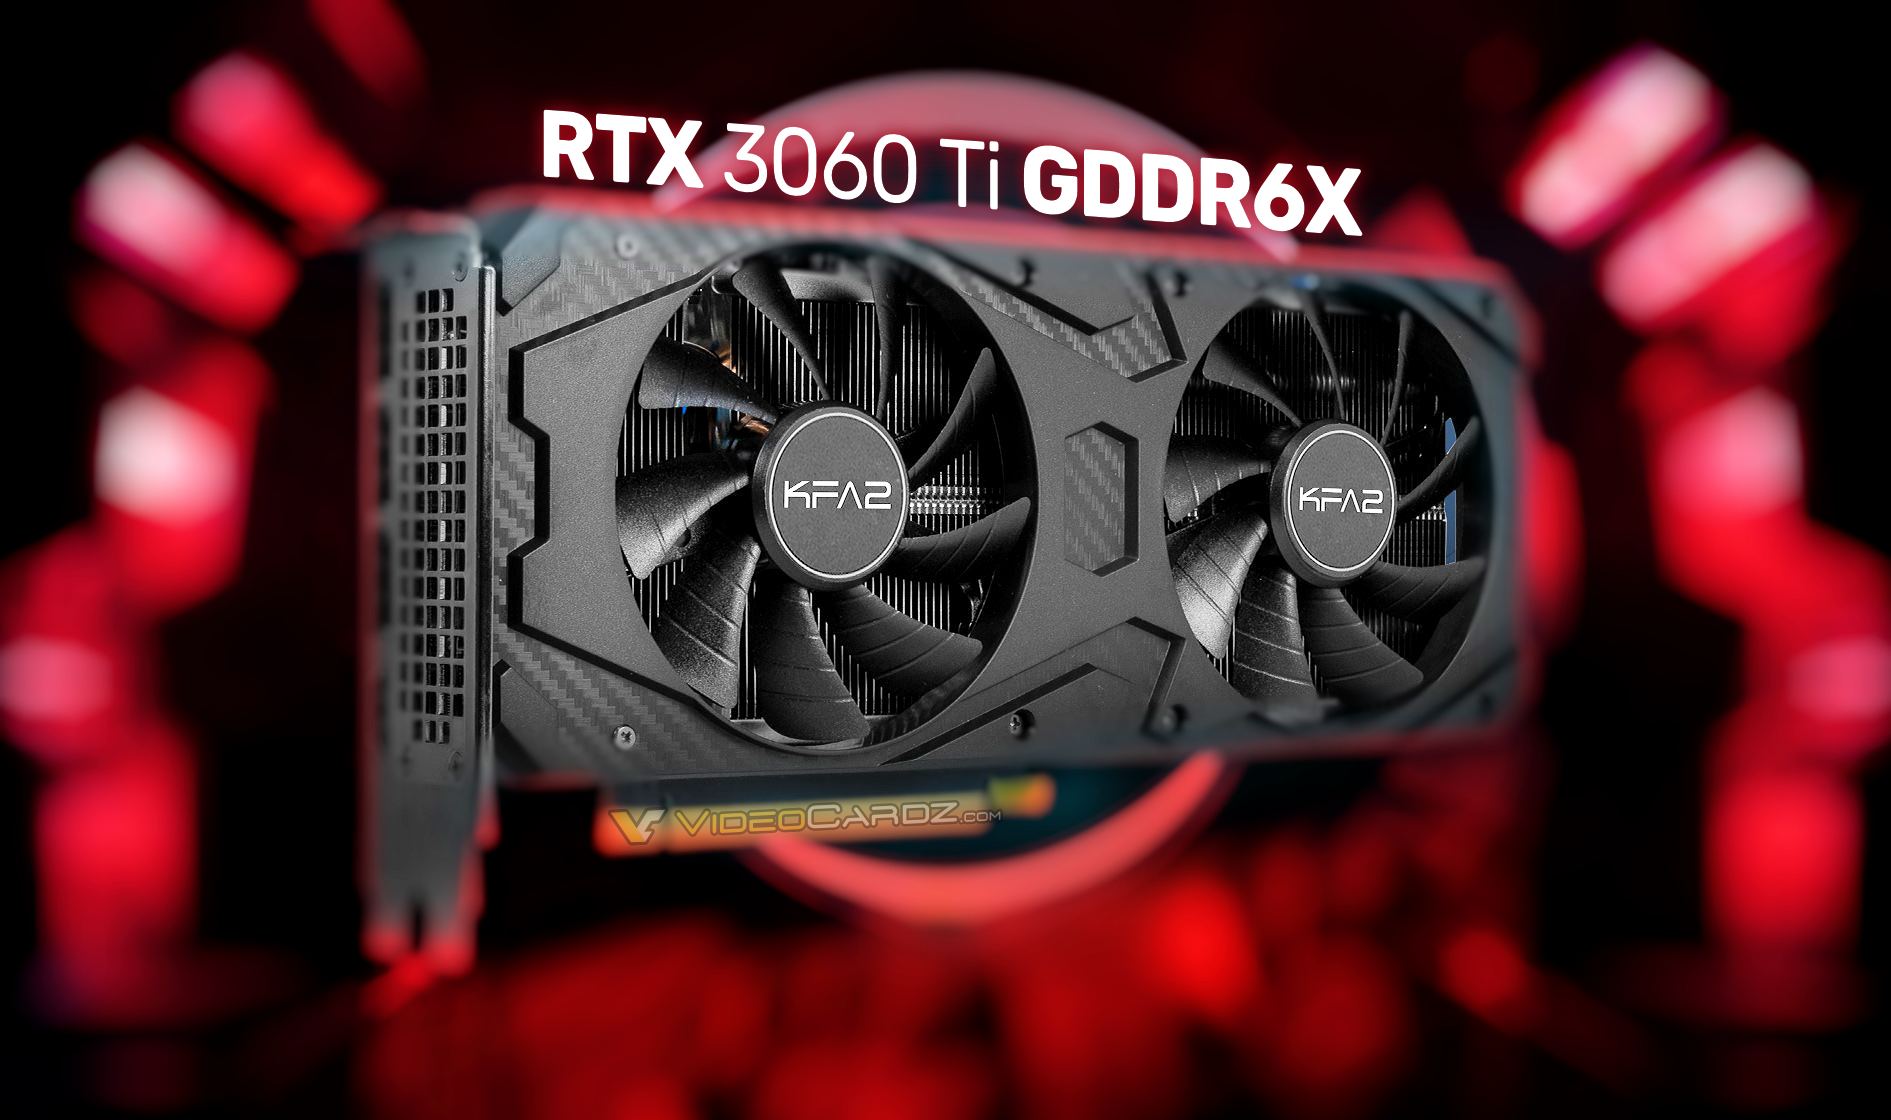 GeForce RTX 3060 Ti GDDR6X is faster than factory overclocked